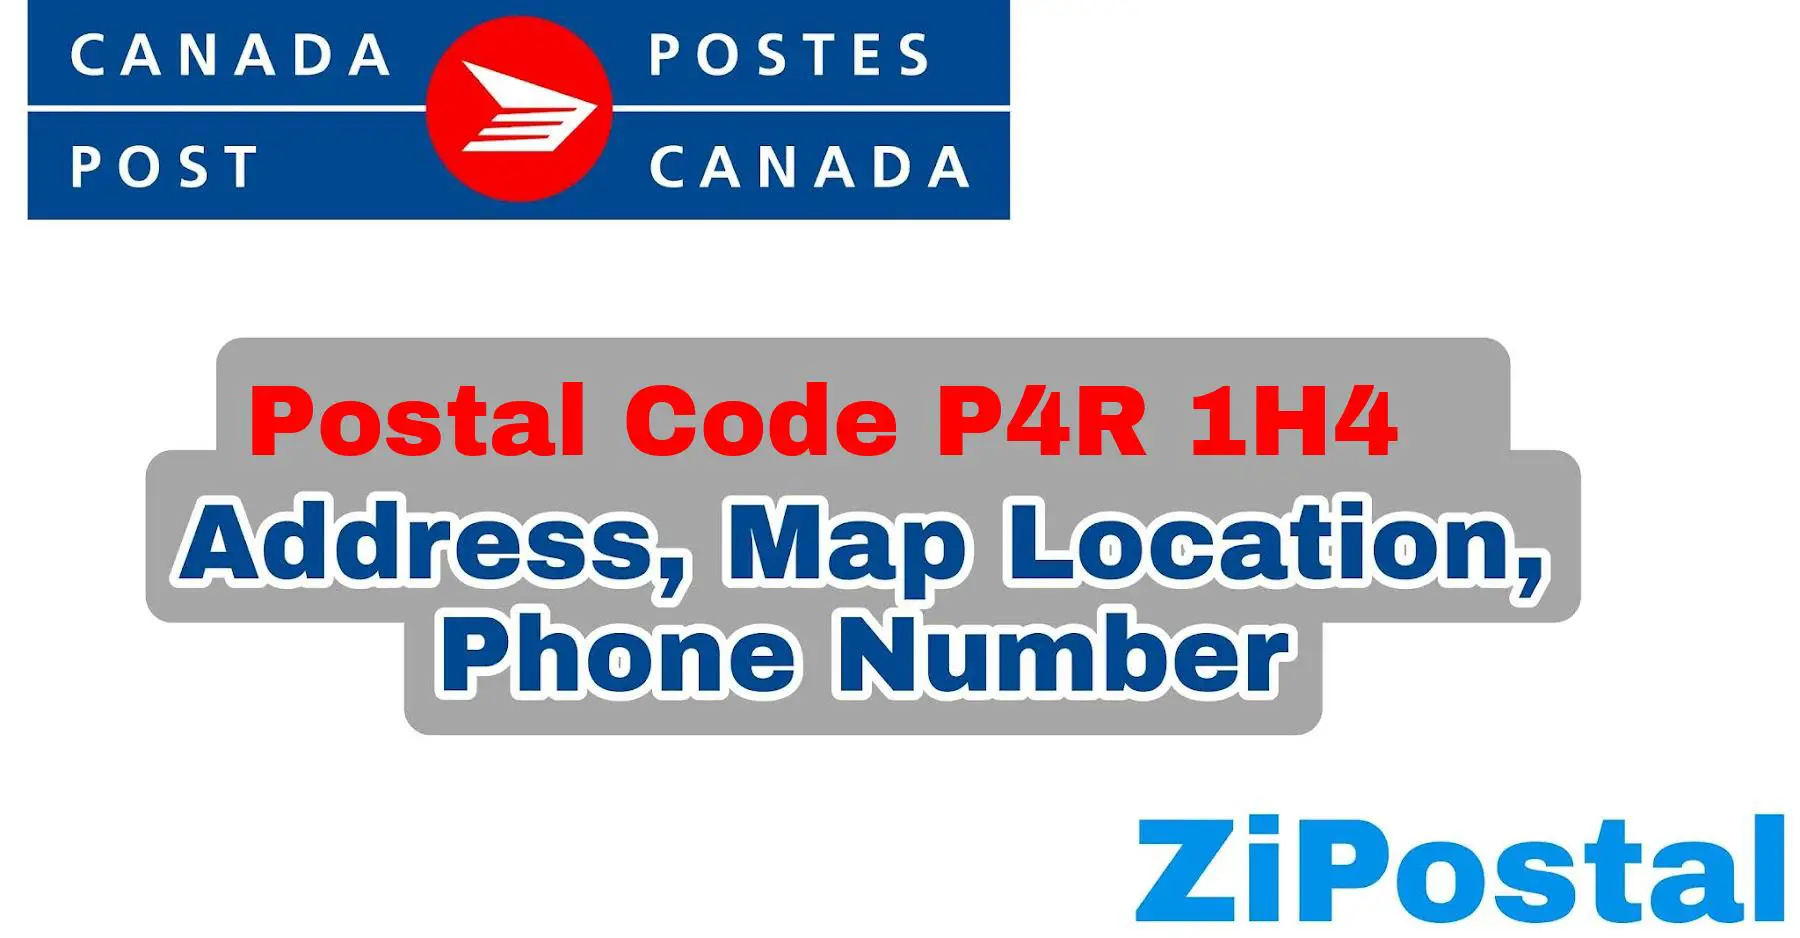 Postal Code P4R 1H4 Address Map Location and Phone Number